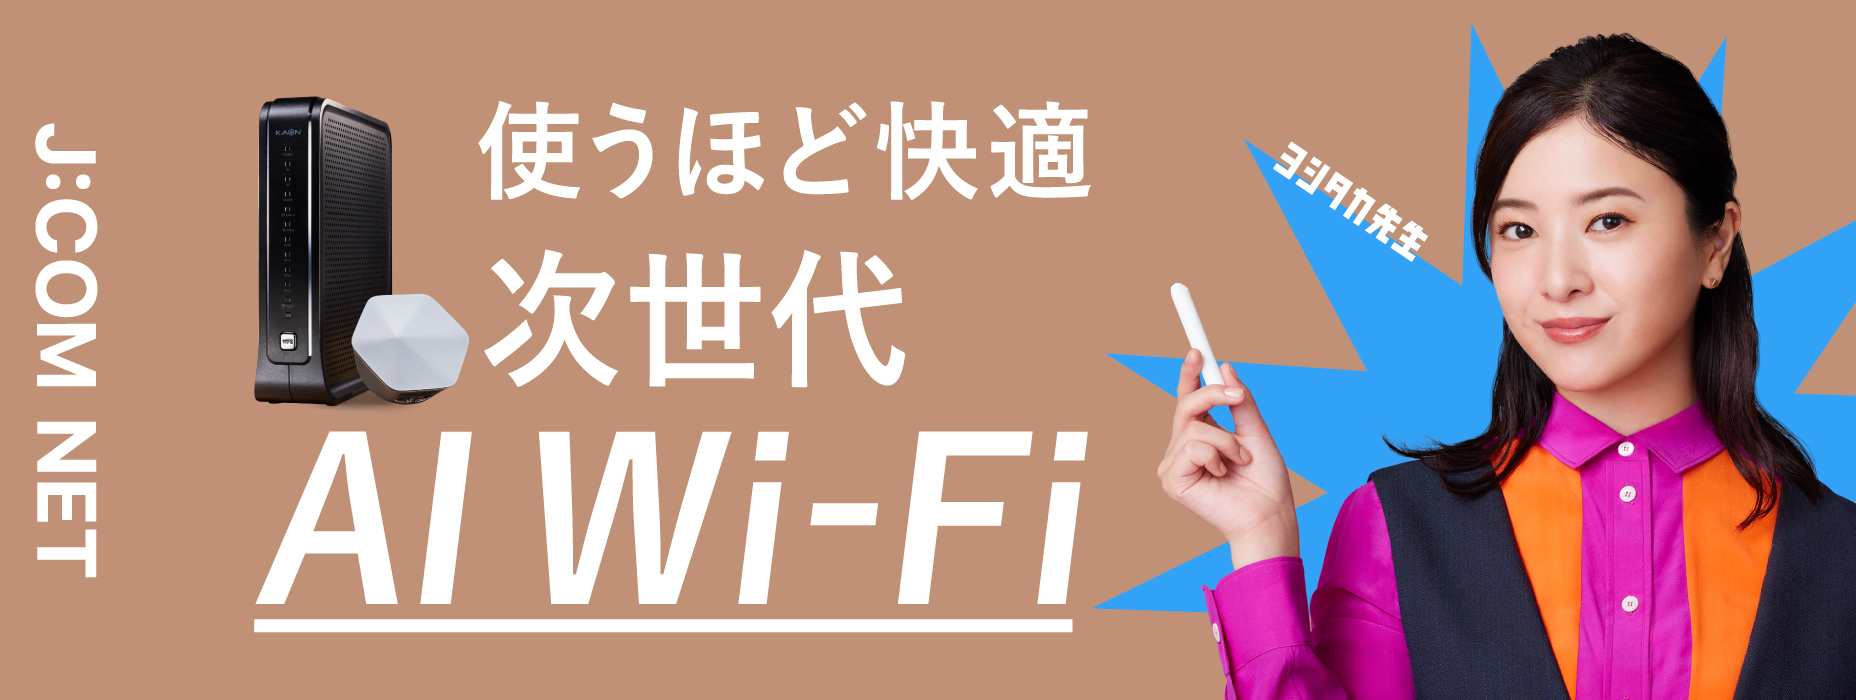 Japan's first next-generation AI Wi-Fi is very popular! *Japan's first sale of modems with built-in PLUME® technology